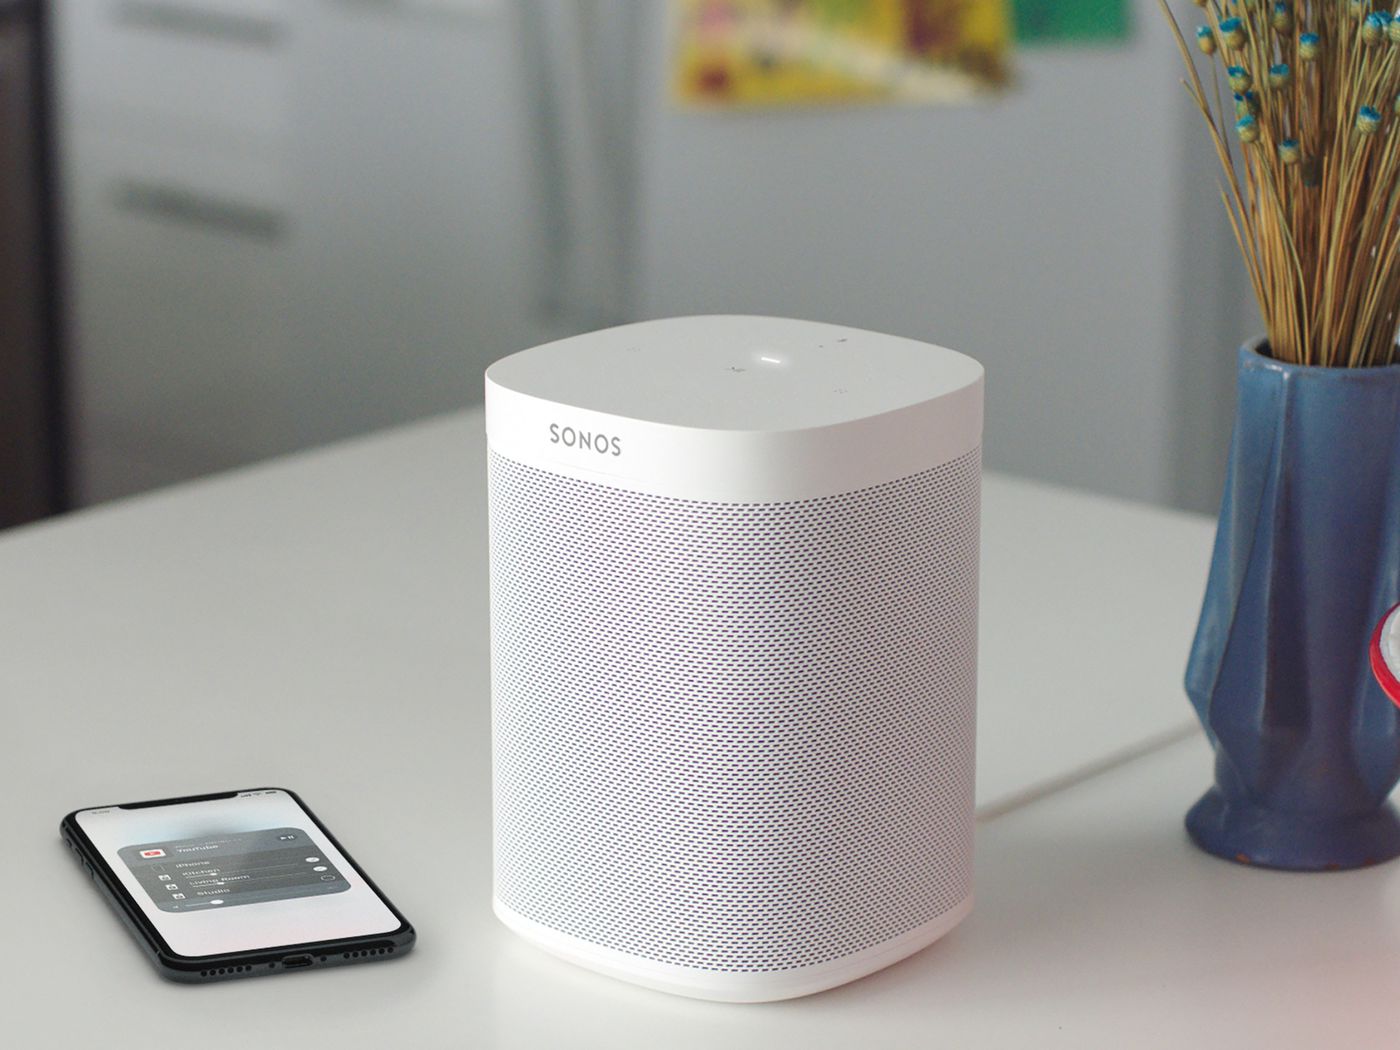 how-to-connect-a-sonos-speaker-to-an-iphone